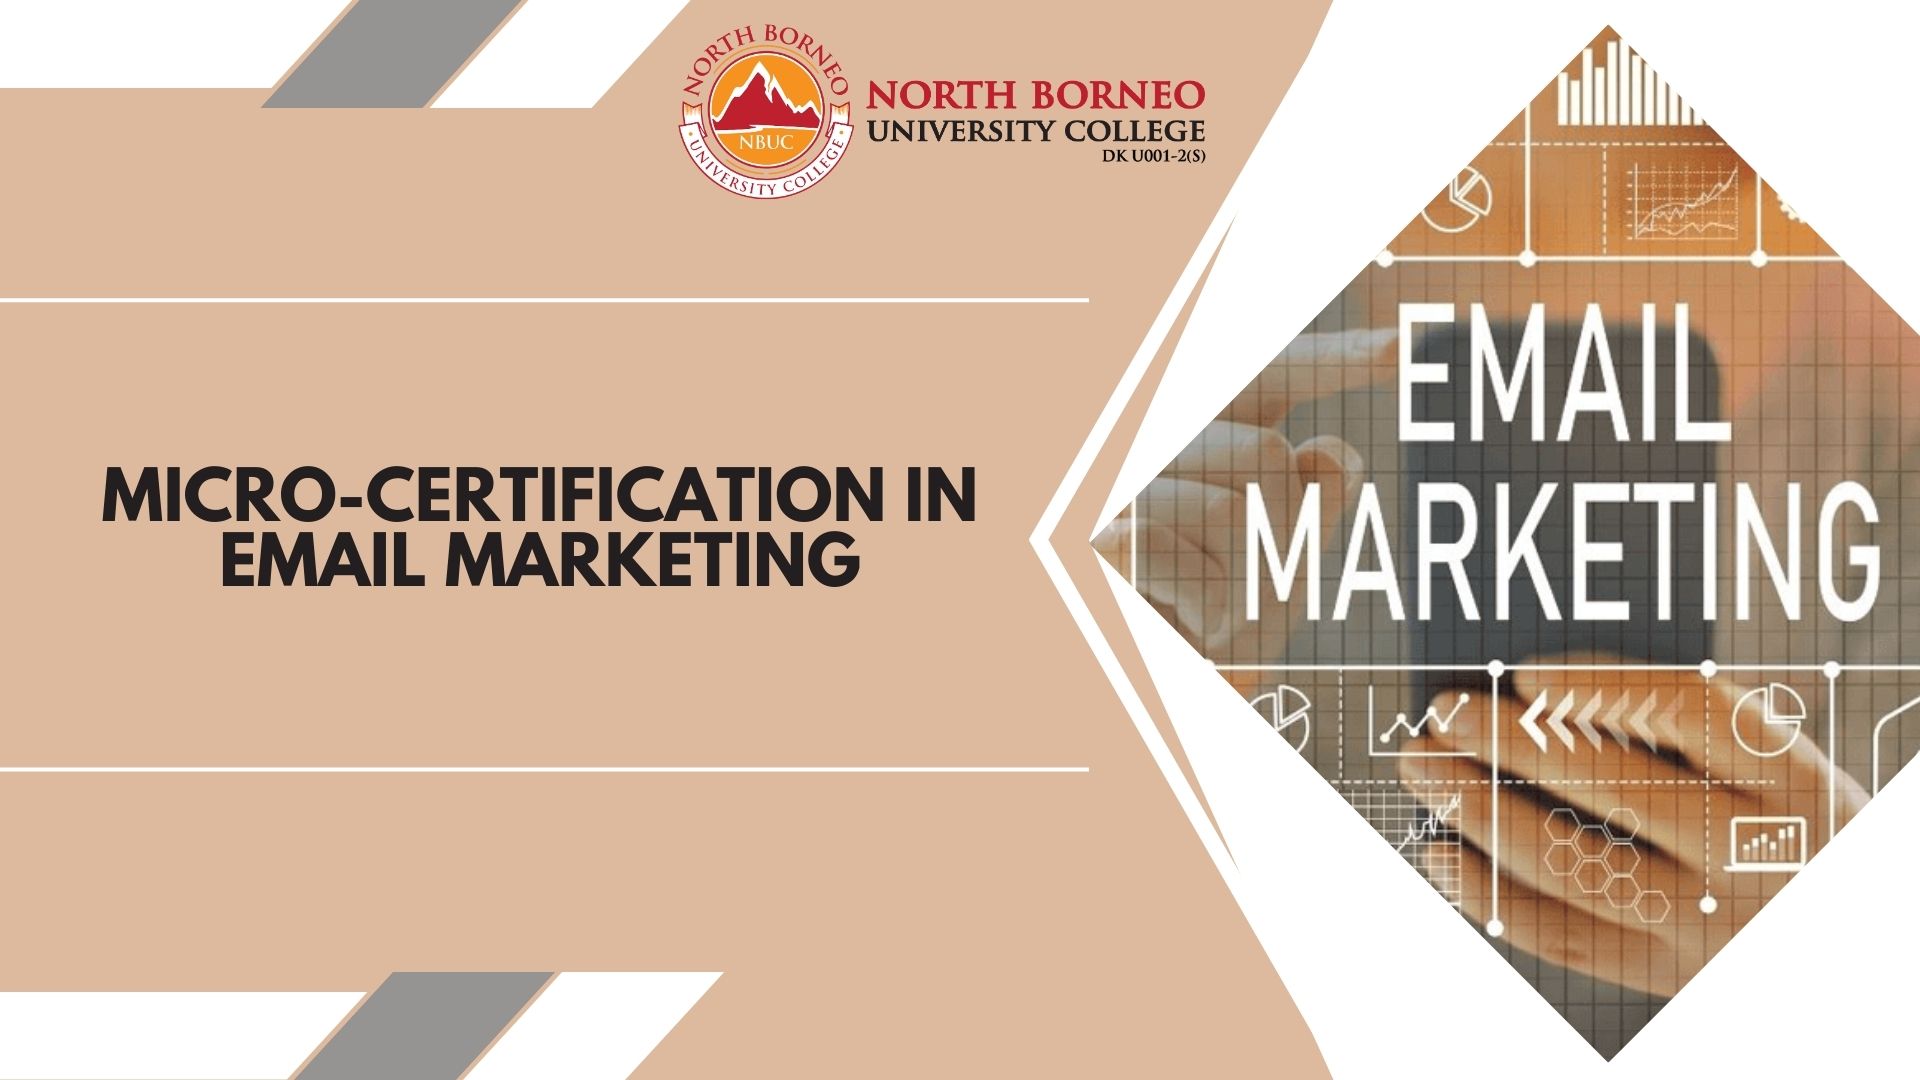 MICRO-CERTIFICATION IN EMAIL MARKETING